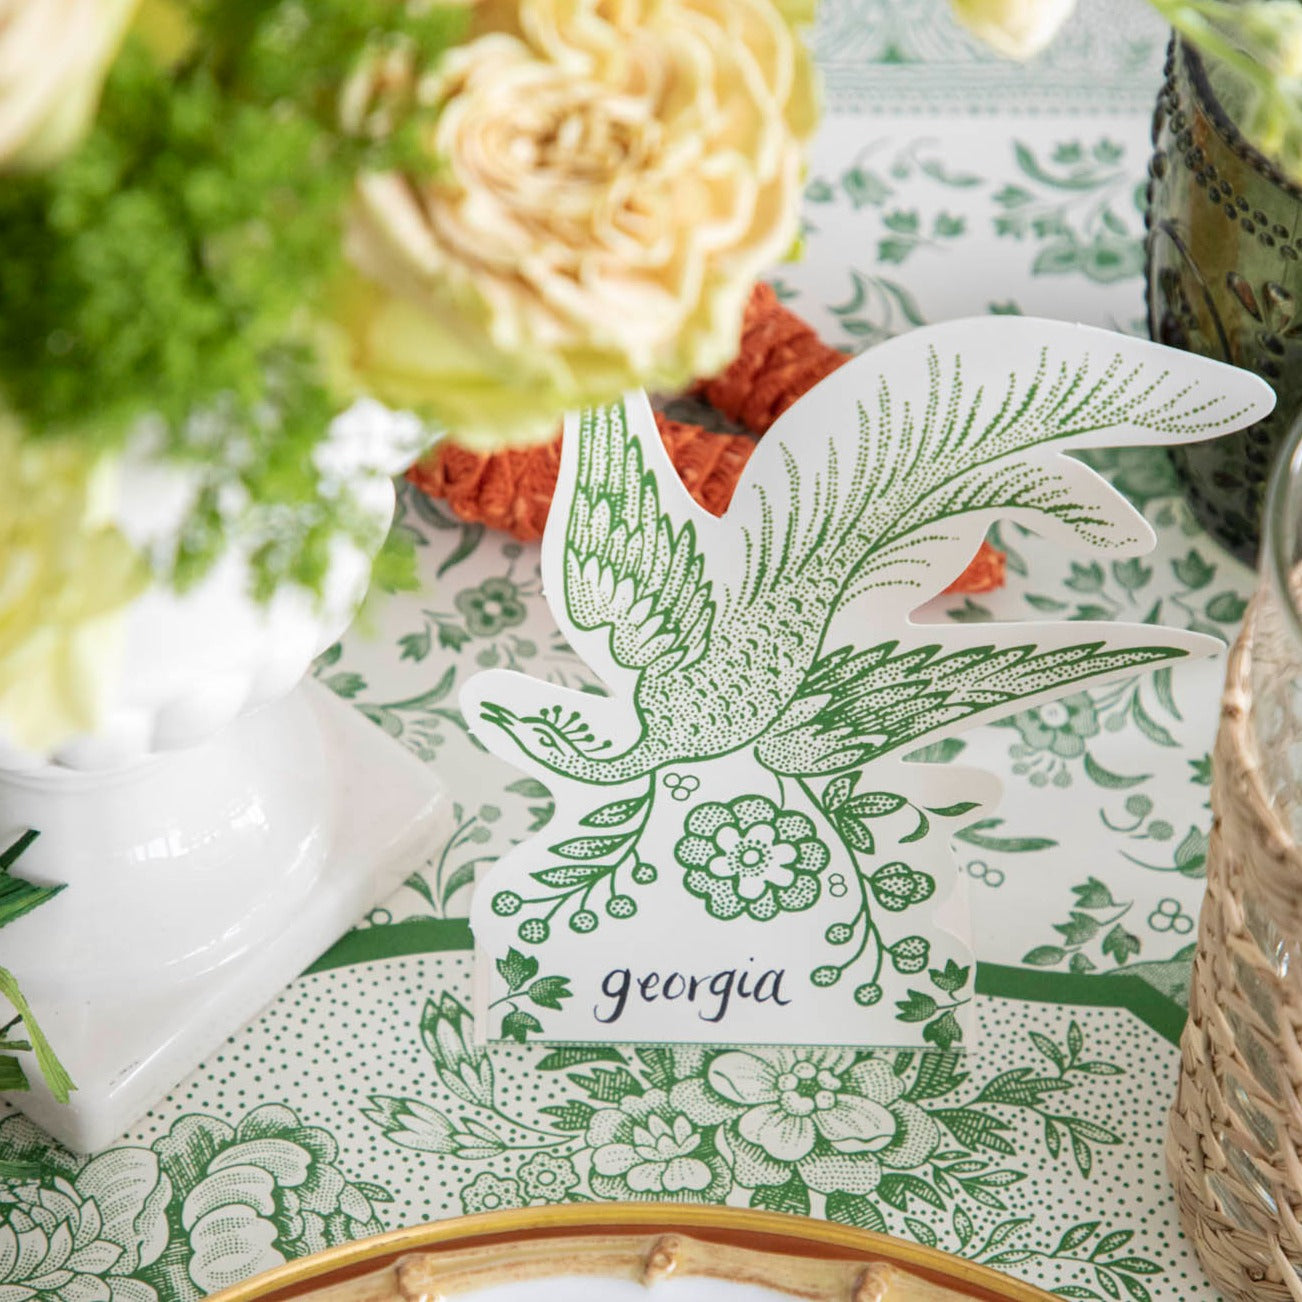 A Hester &amp; Cook Green Asiatic Pheasants Place Card and white table setting with place cards and flowers, ensuring guests feel welcomed and organized with the use of place cards.